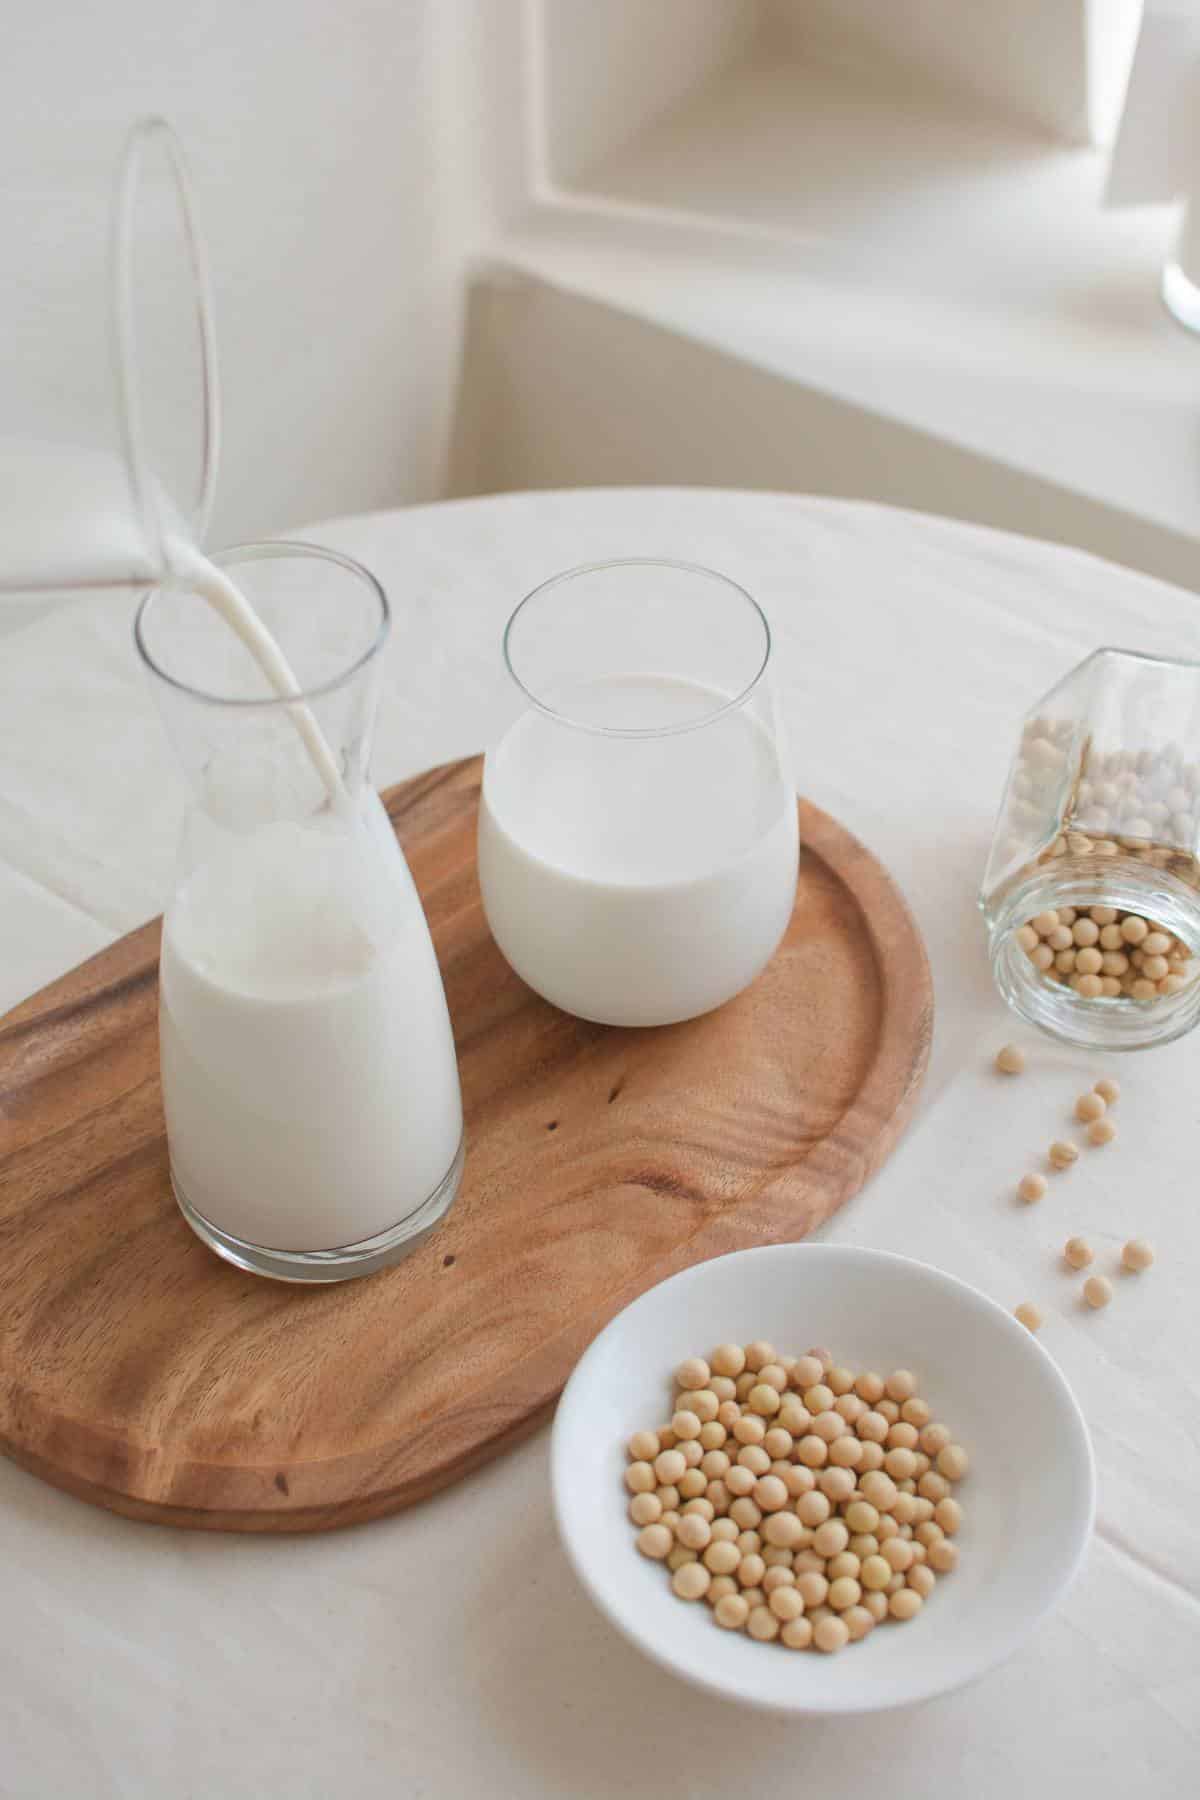 Soy milk being poured into a glass with a bowl of soy beans next to it.